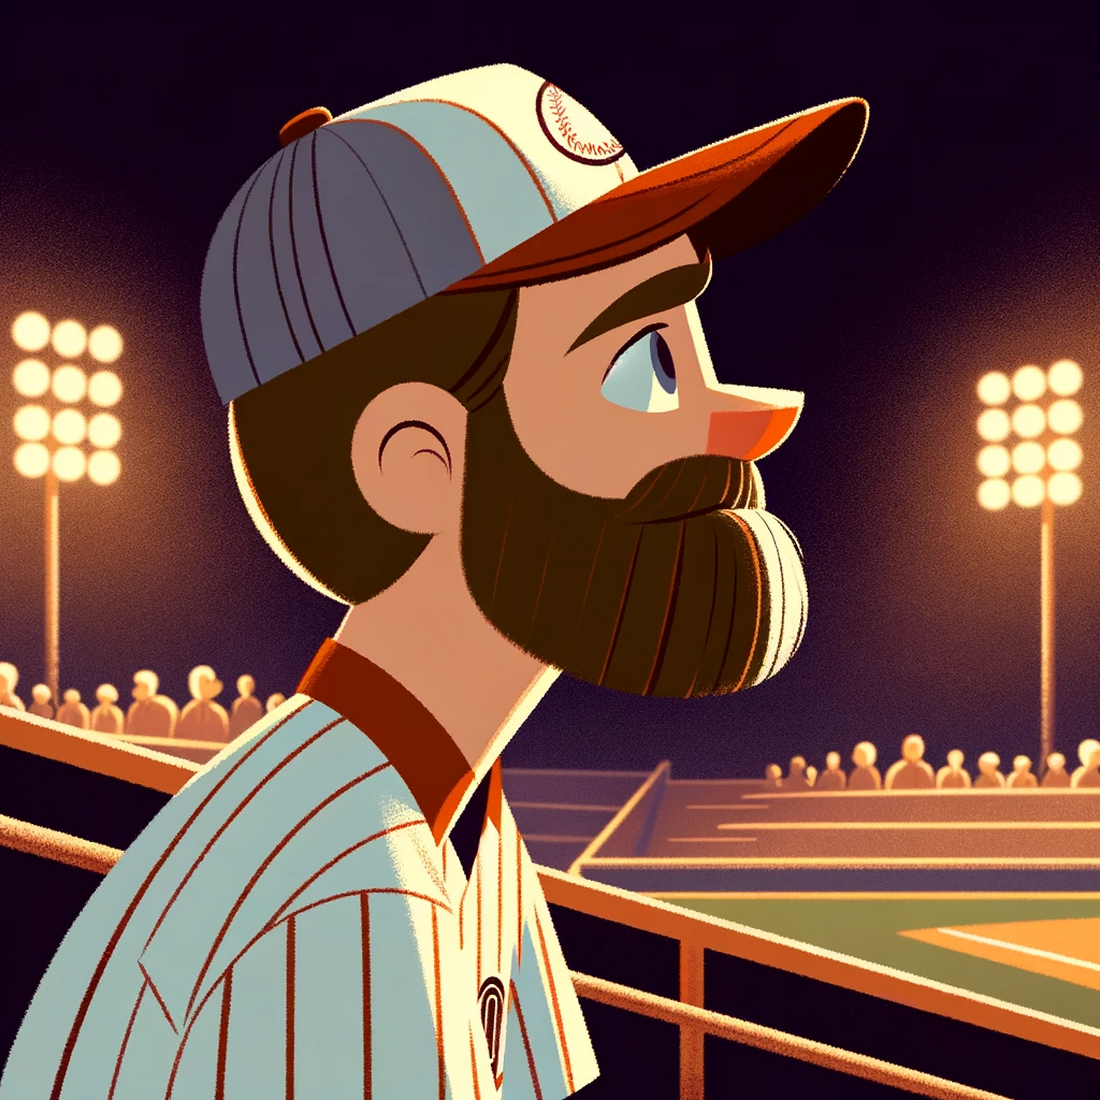 AI of a bearded man, side profile, while he is watching a baseball game, in a cartoon style